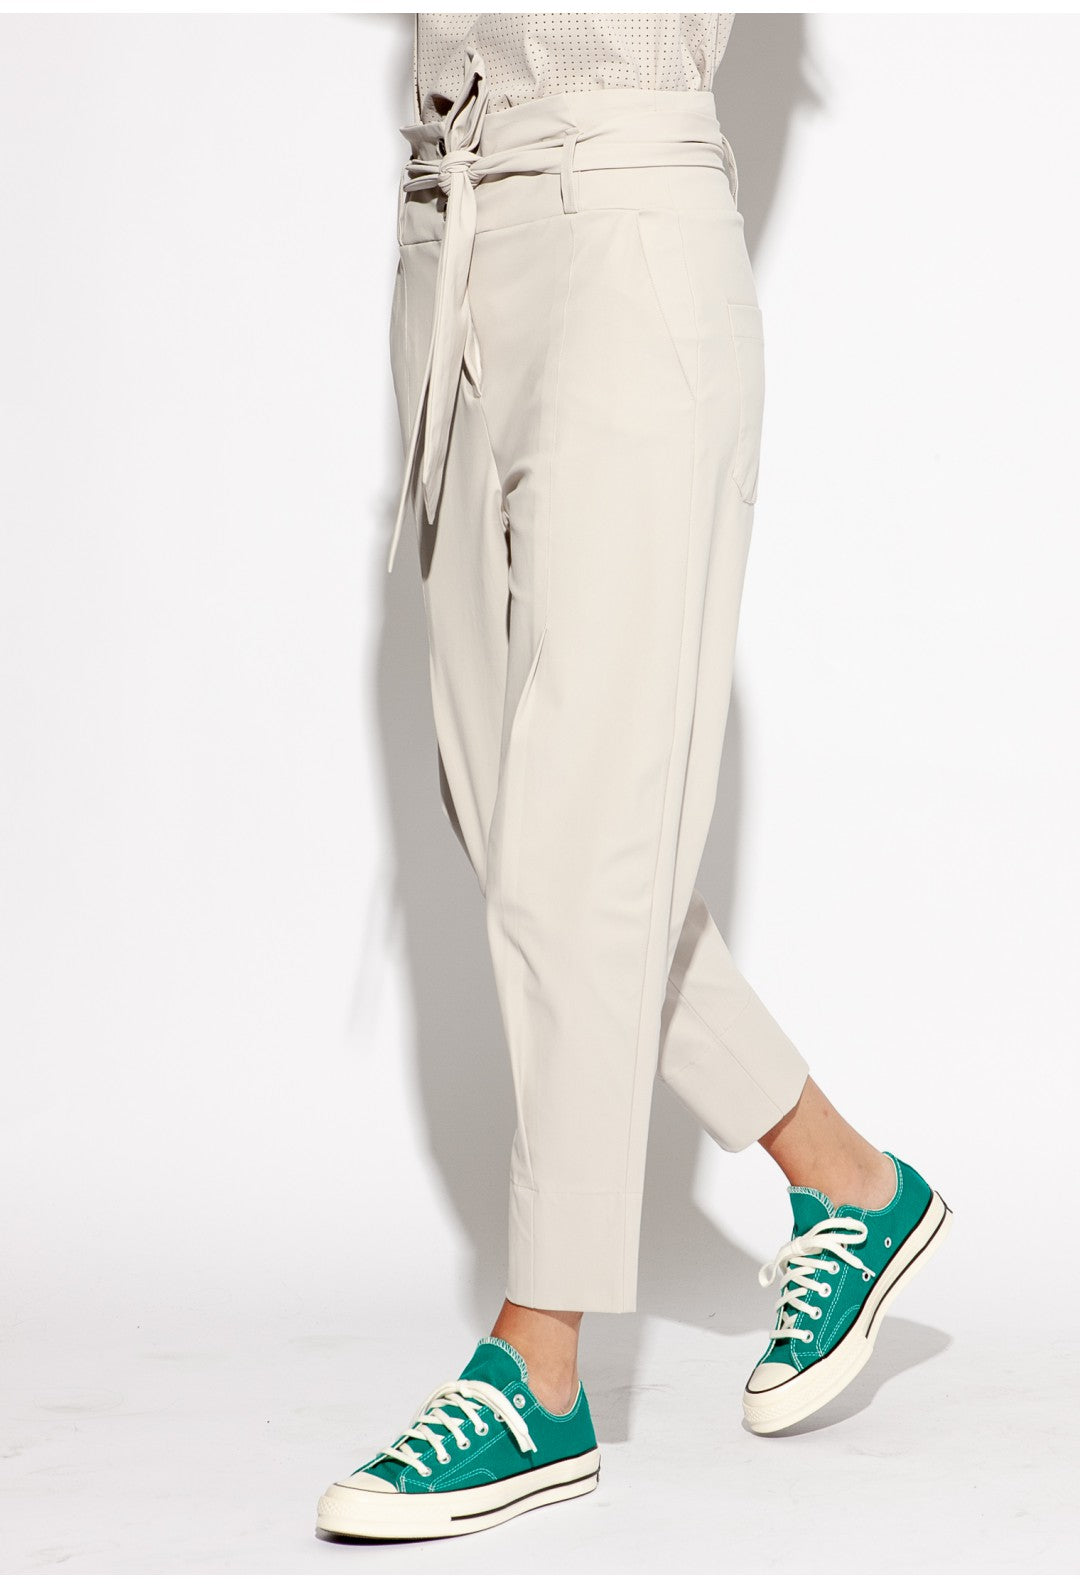 Front left sided bottom half view of a woman wearing the Indies Collin Pant. This pant is pebble/beige colored with a straight leg and a high rise waistband with a belt.